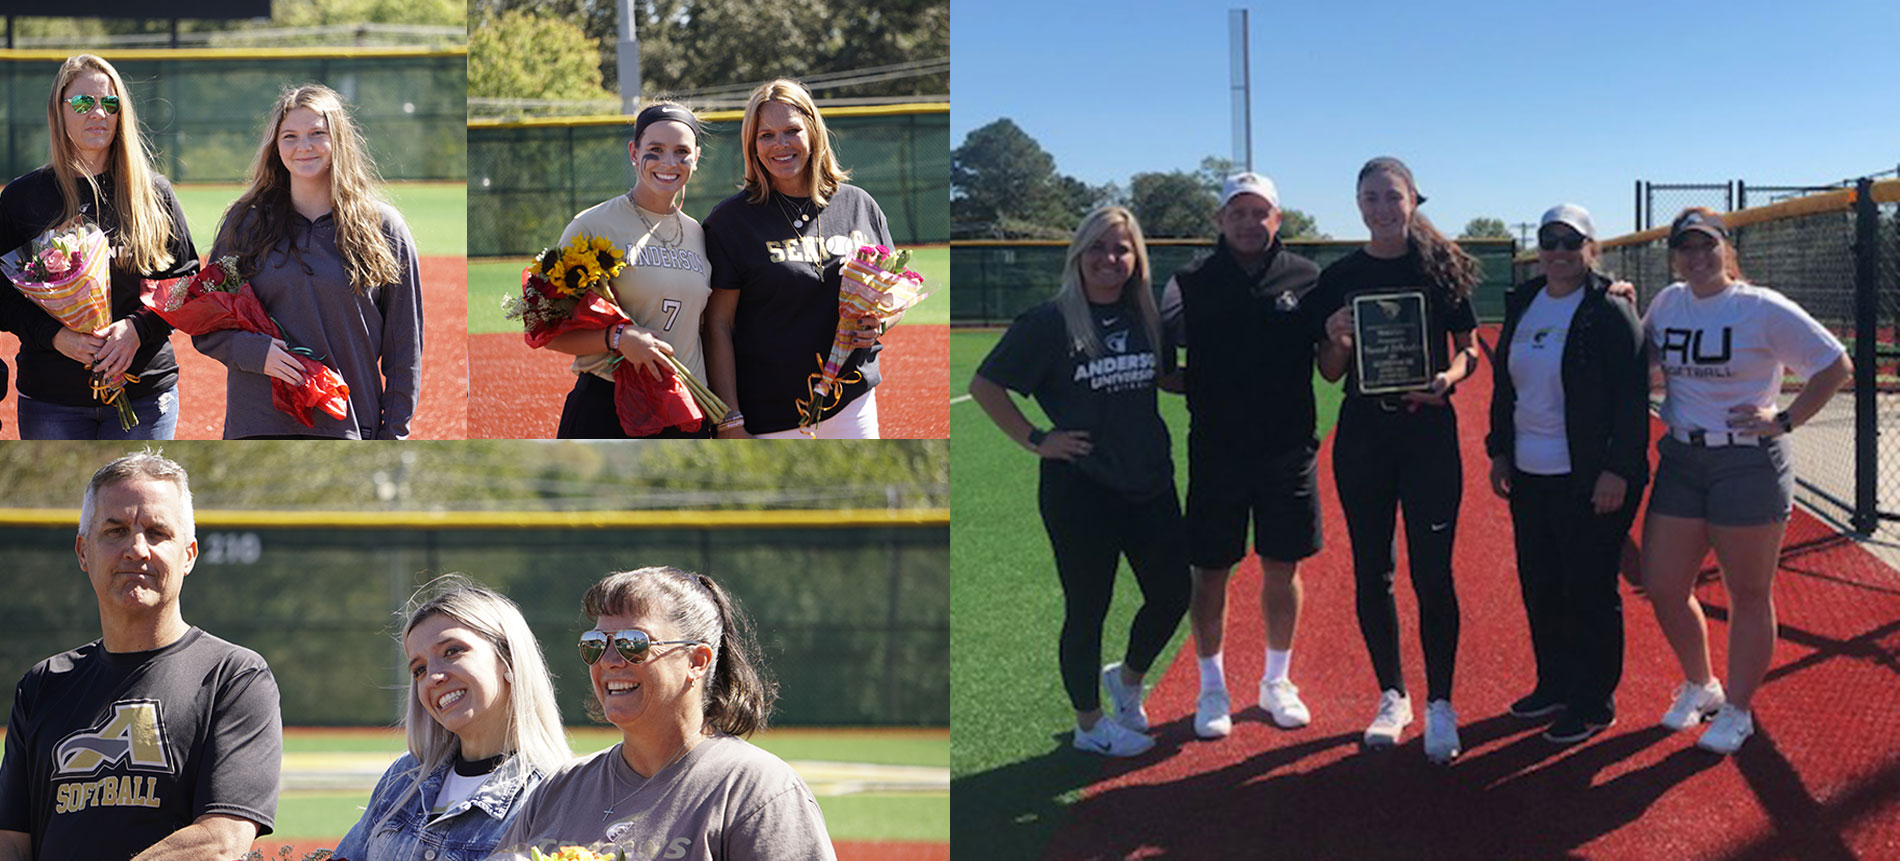 Softball Honors 2020 Seniors and Names the First Recipient of the David Child ASA Softball Hall of Fame Scholarship